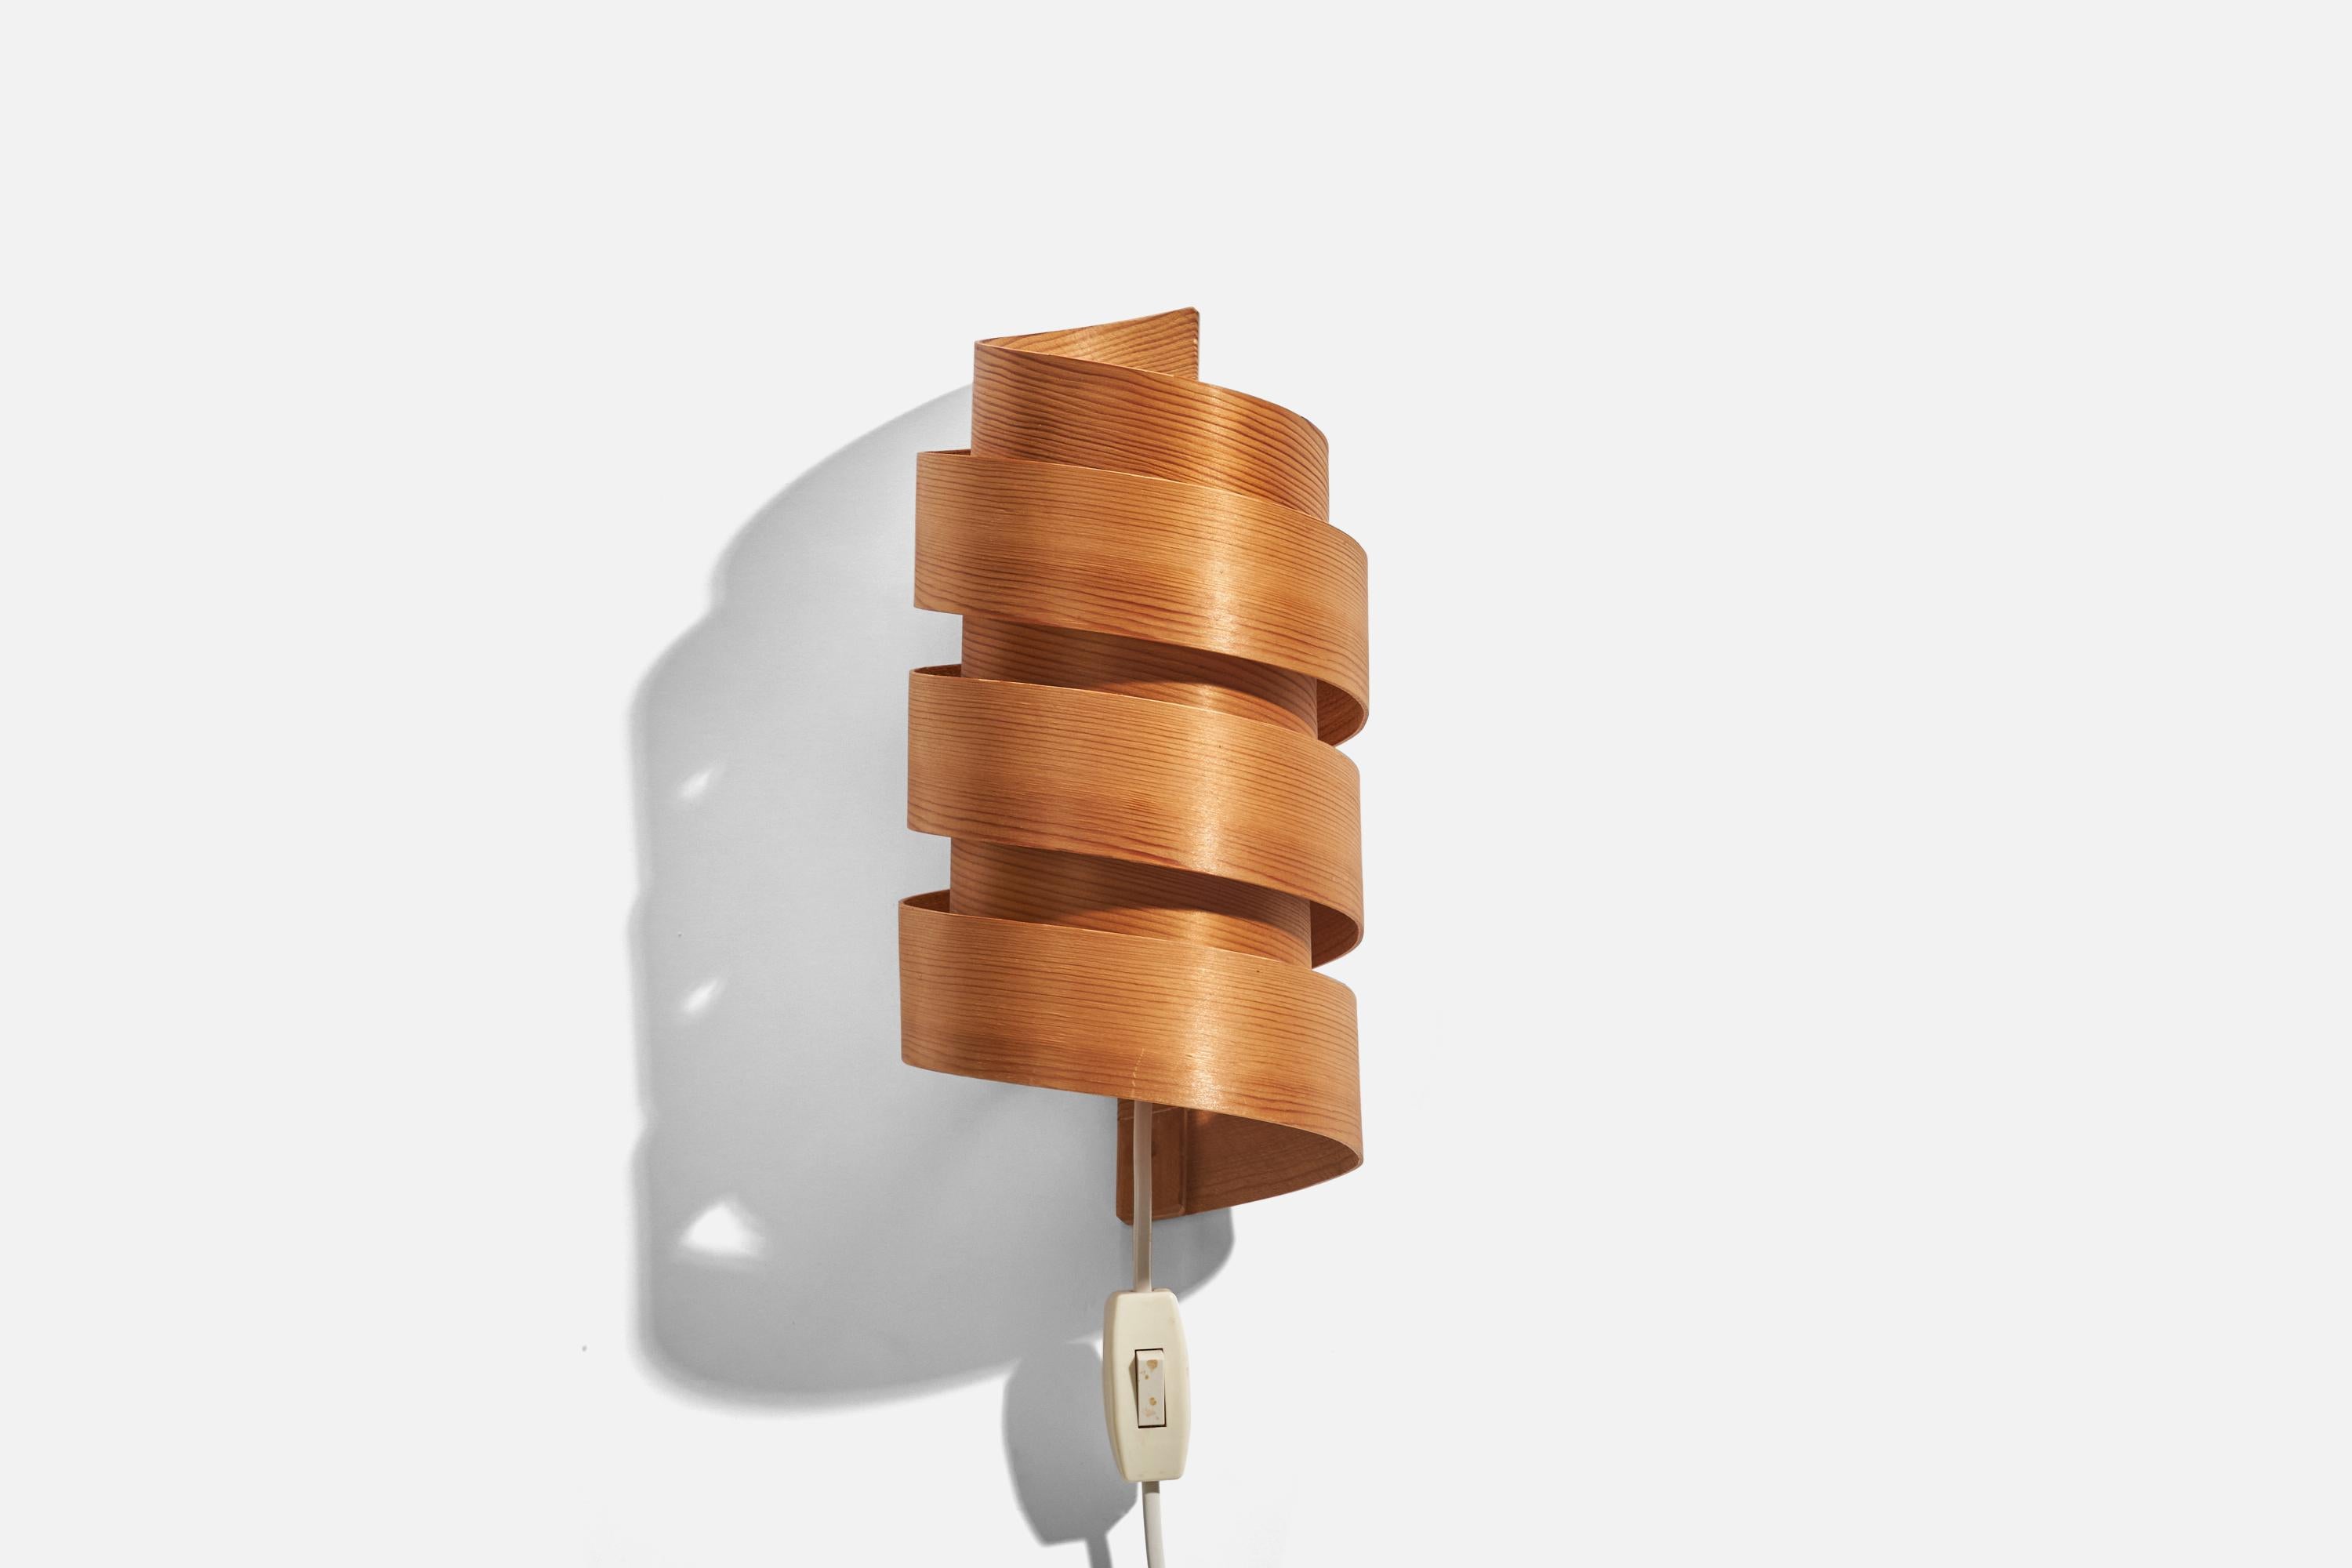 A pine and moulded pine veneer sconce designed and produced in Sweden, 1970s. 

Dimensions of back plate (inches) : 10.87 x 0.78 x 0.36 (height x width x depth)

Socket takes E-14 bulb.

There is no maximum wattage stated on the fixture.